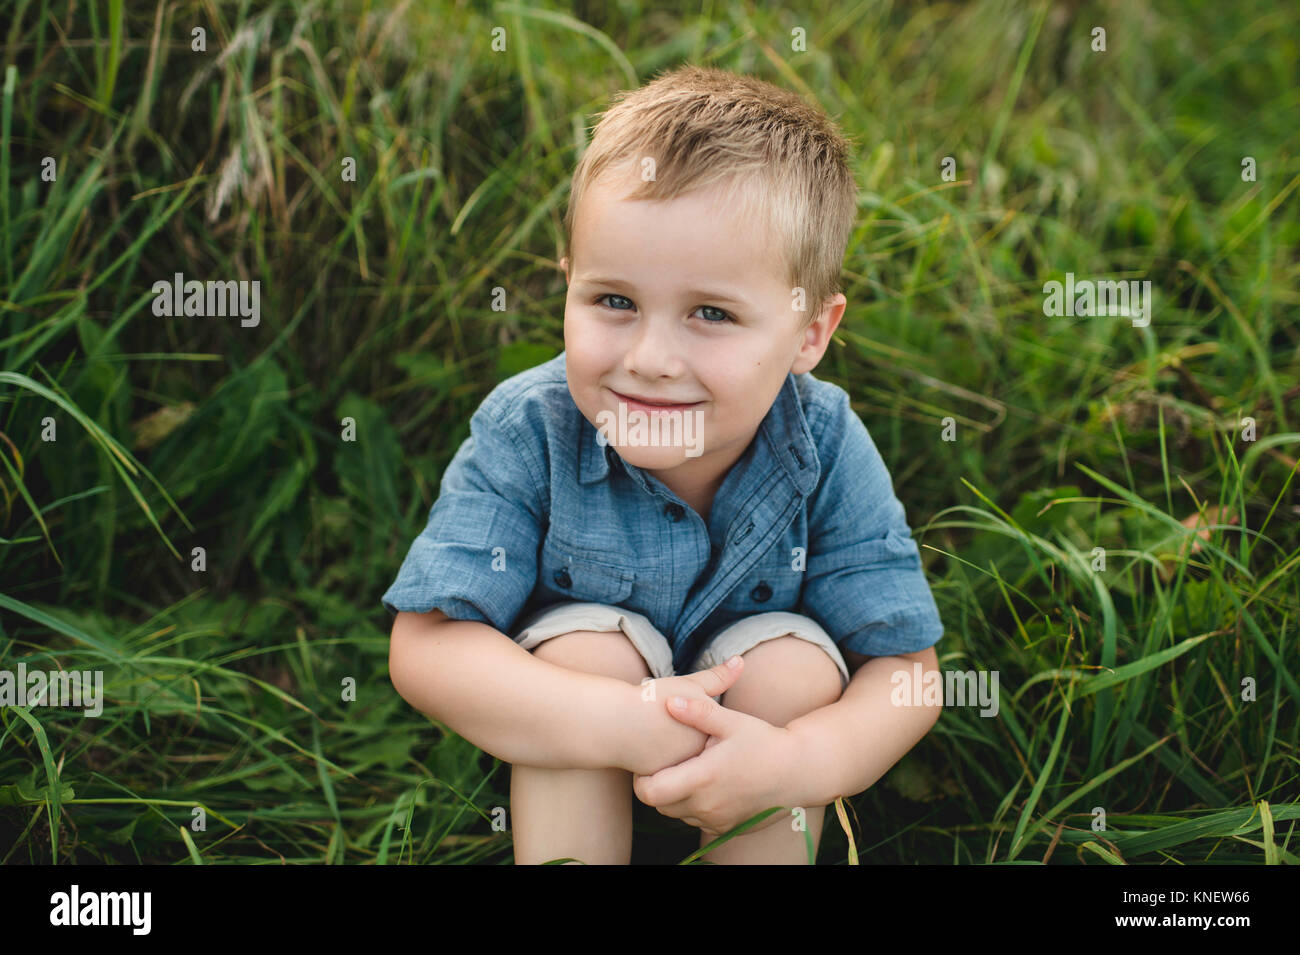 Portrait of smiling boy sitting in tall grass looking at camera Banque D'Images